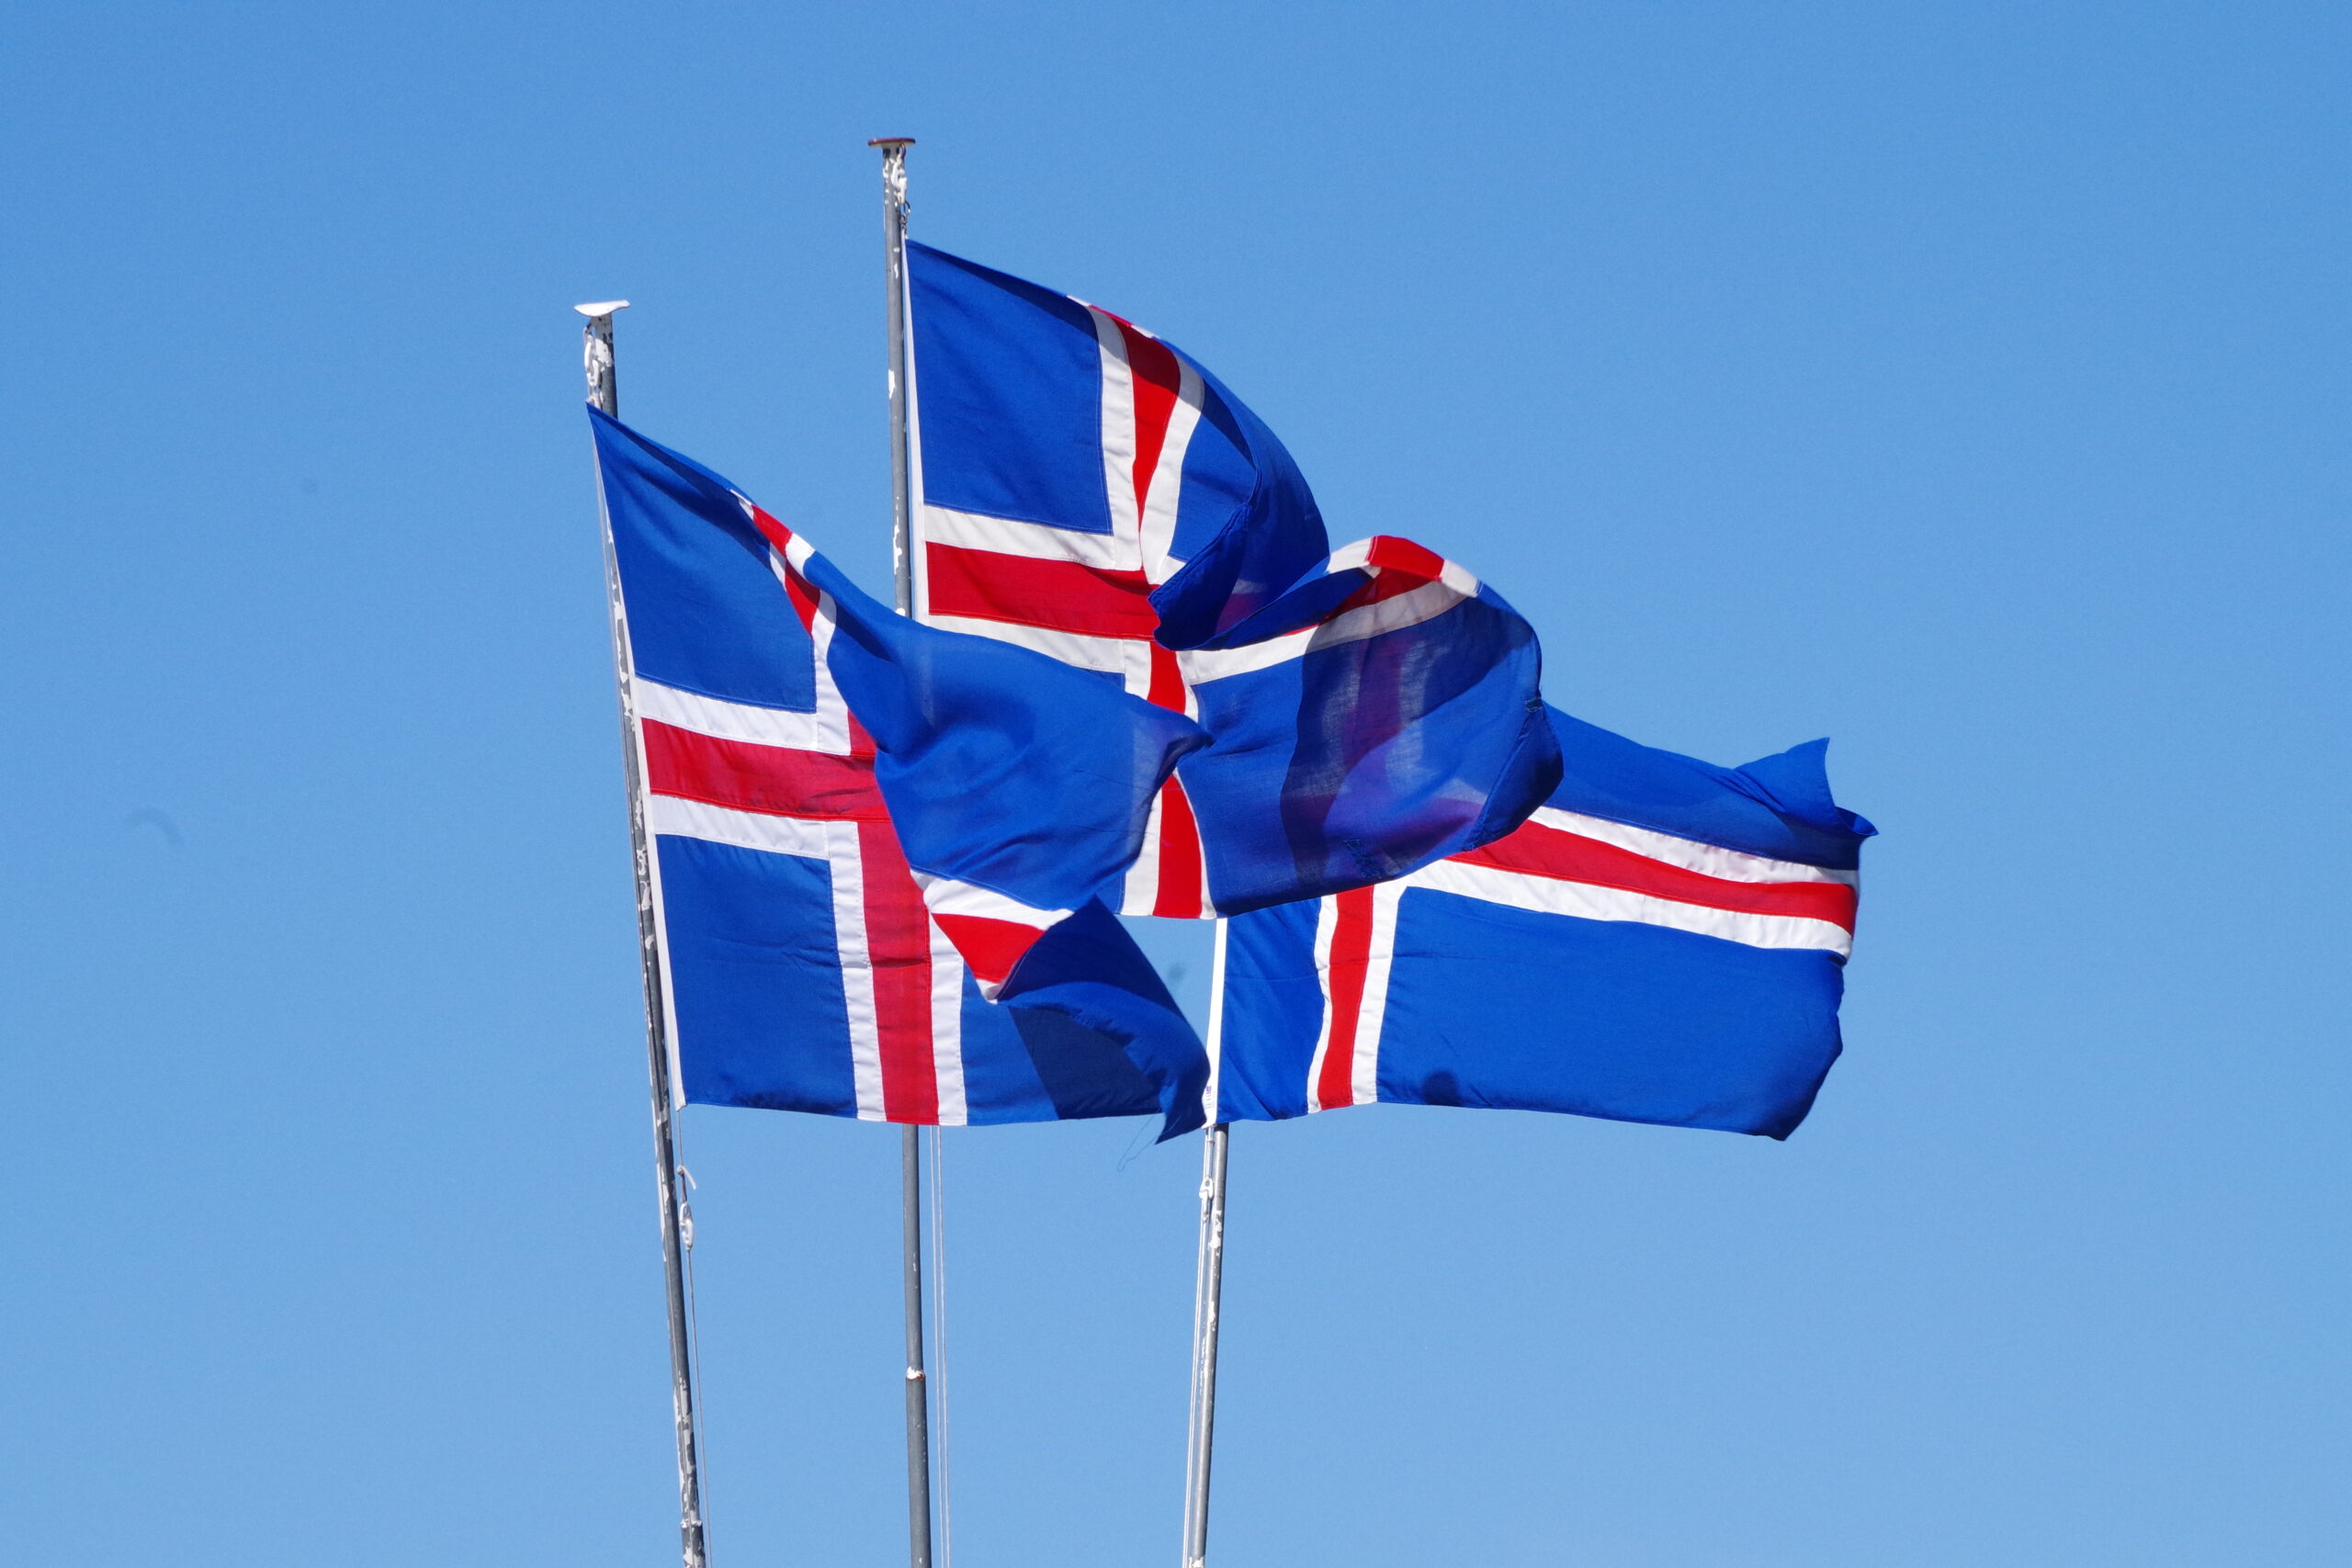 June 17 celebrations in Reykjavik and other municipalities